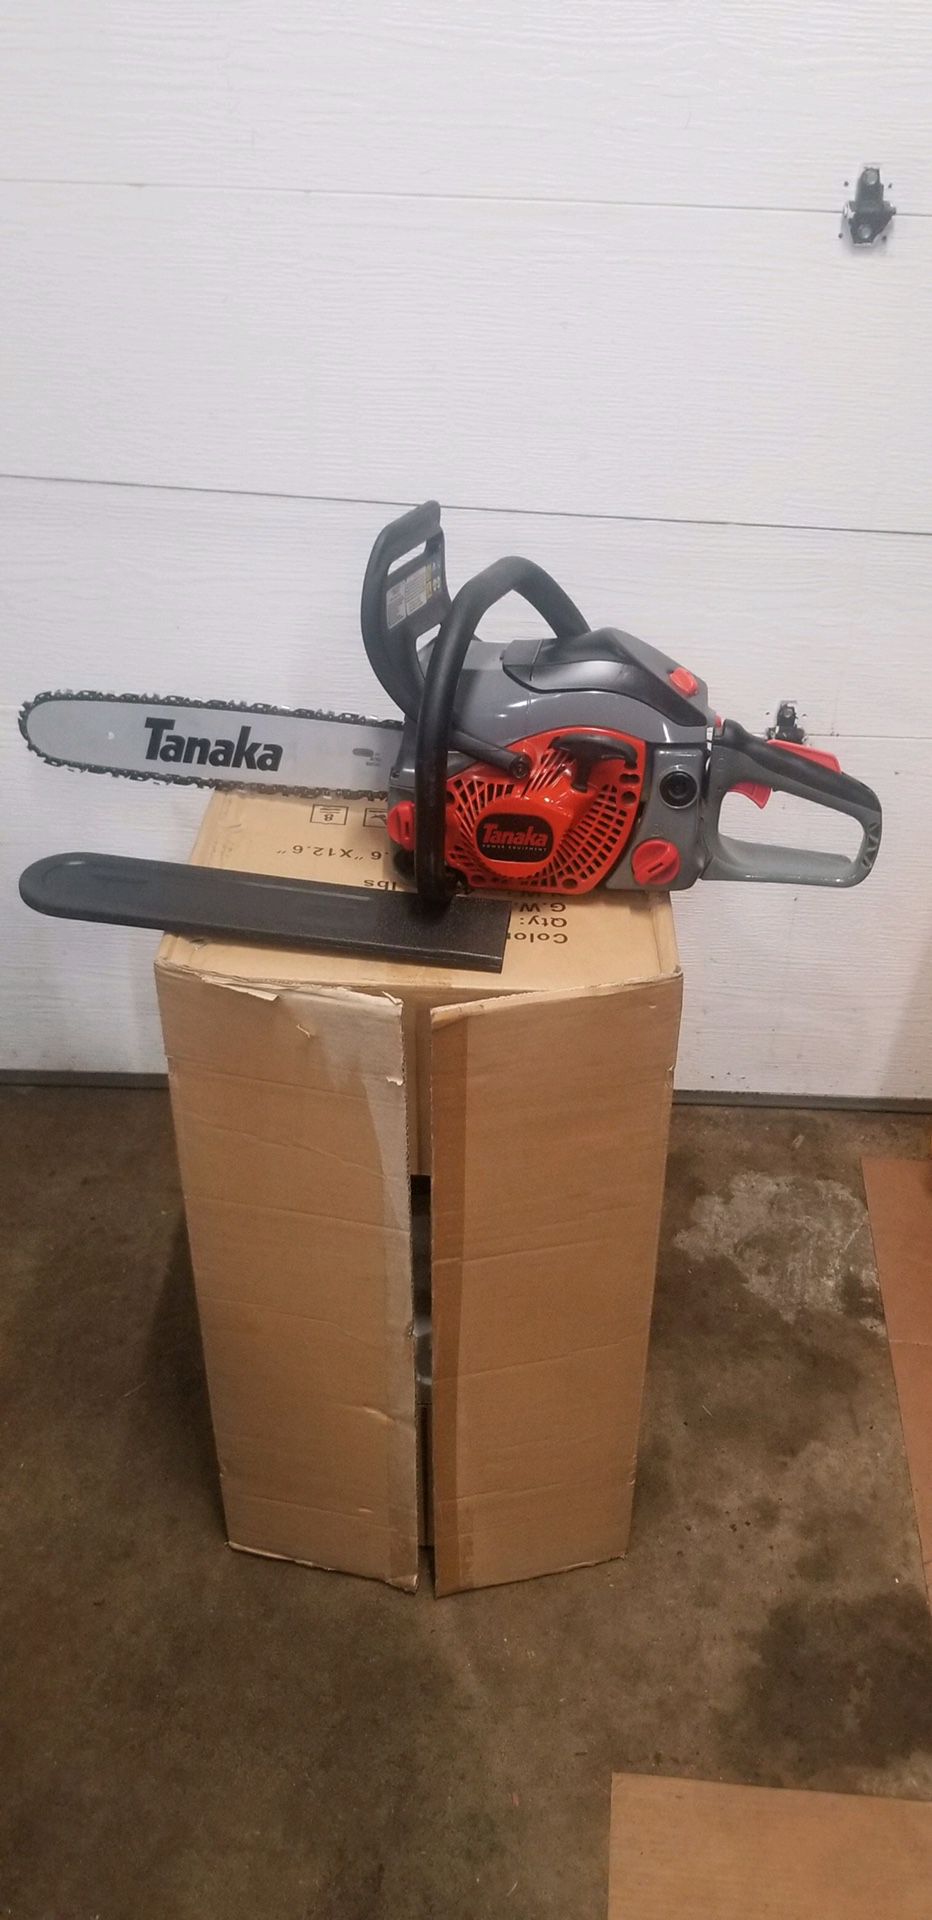 Tanaka 16" Chainsaw. Like new condition. Fires up and runs excellent Commercial Grade unit. $250